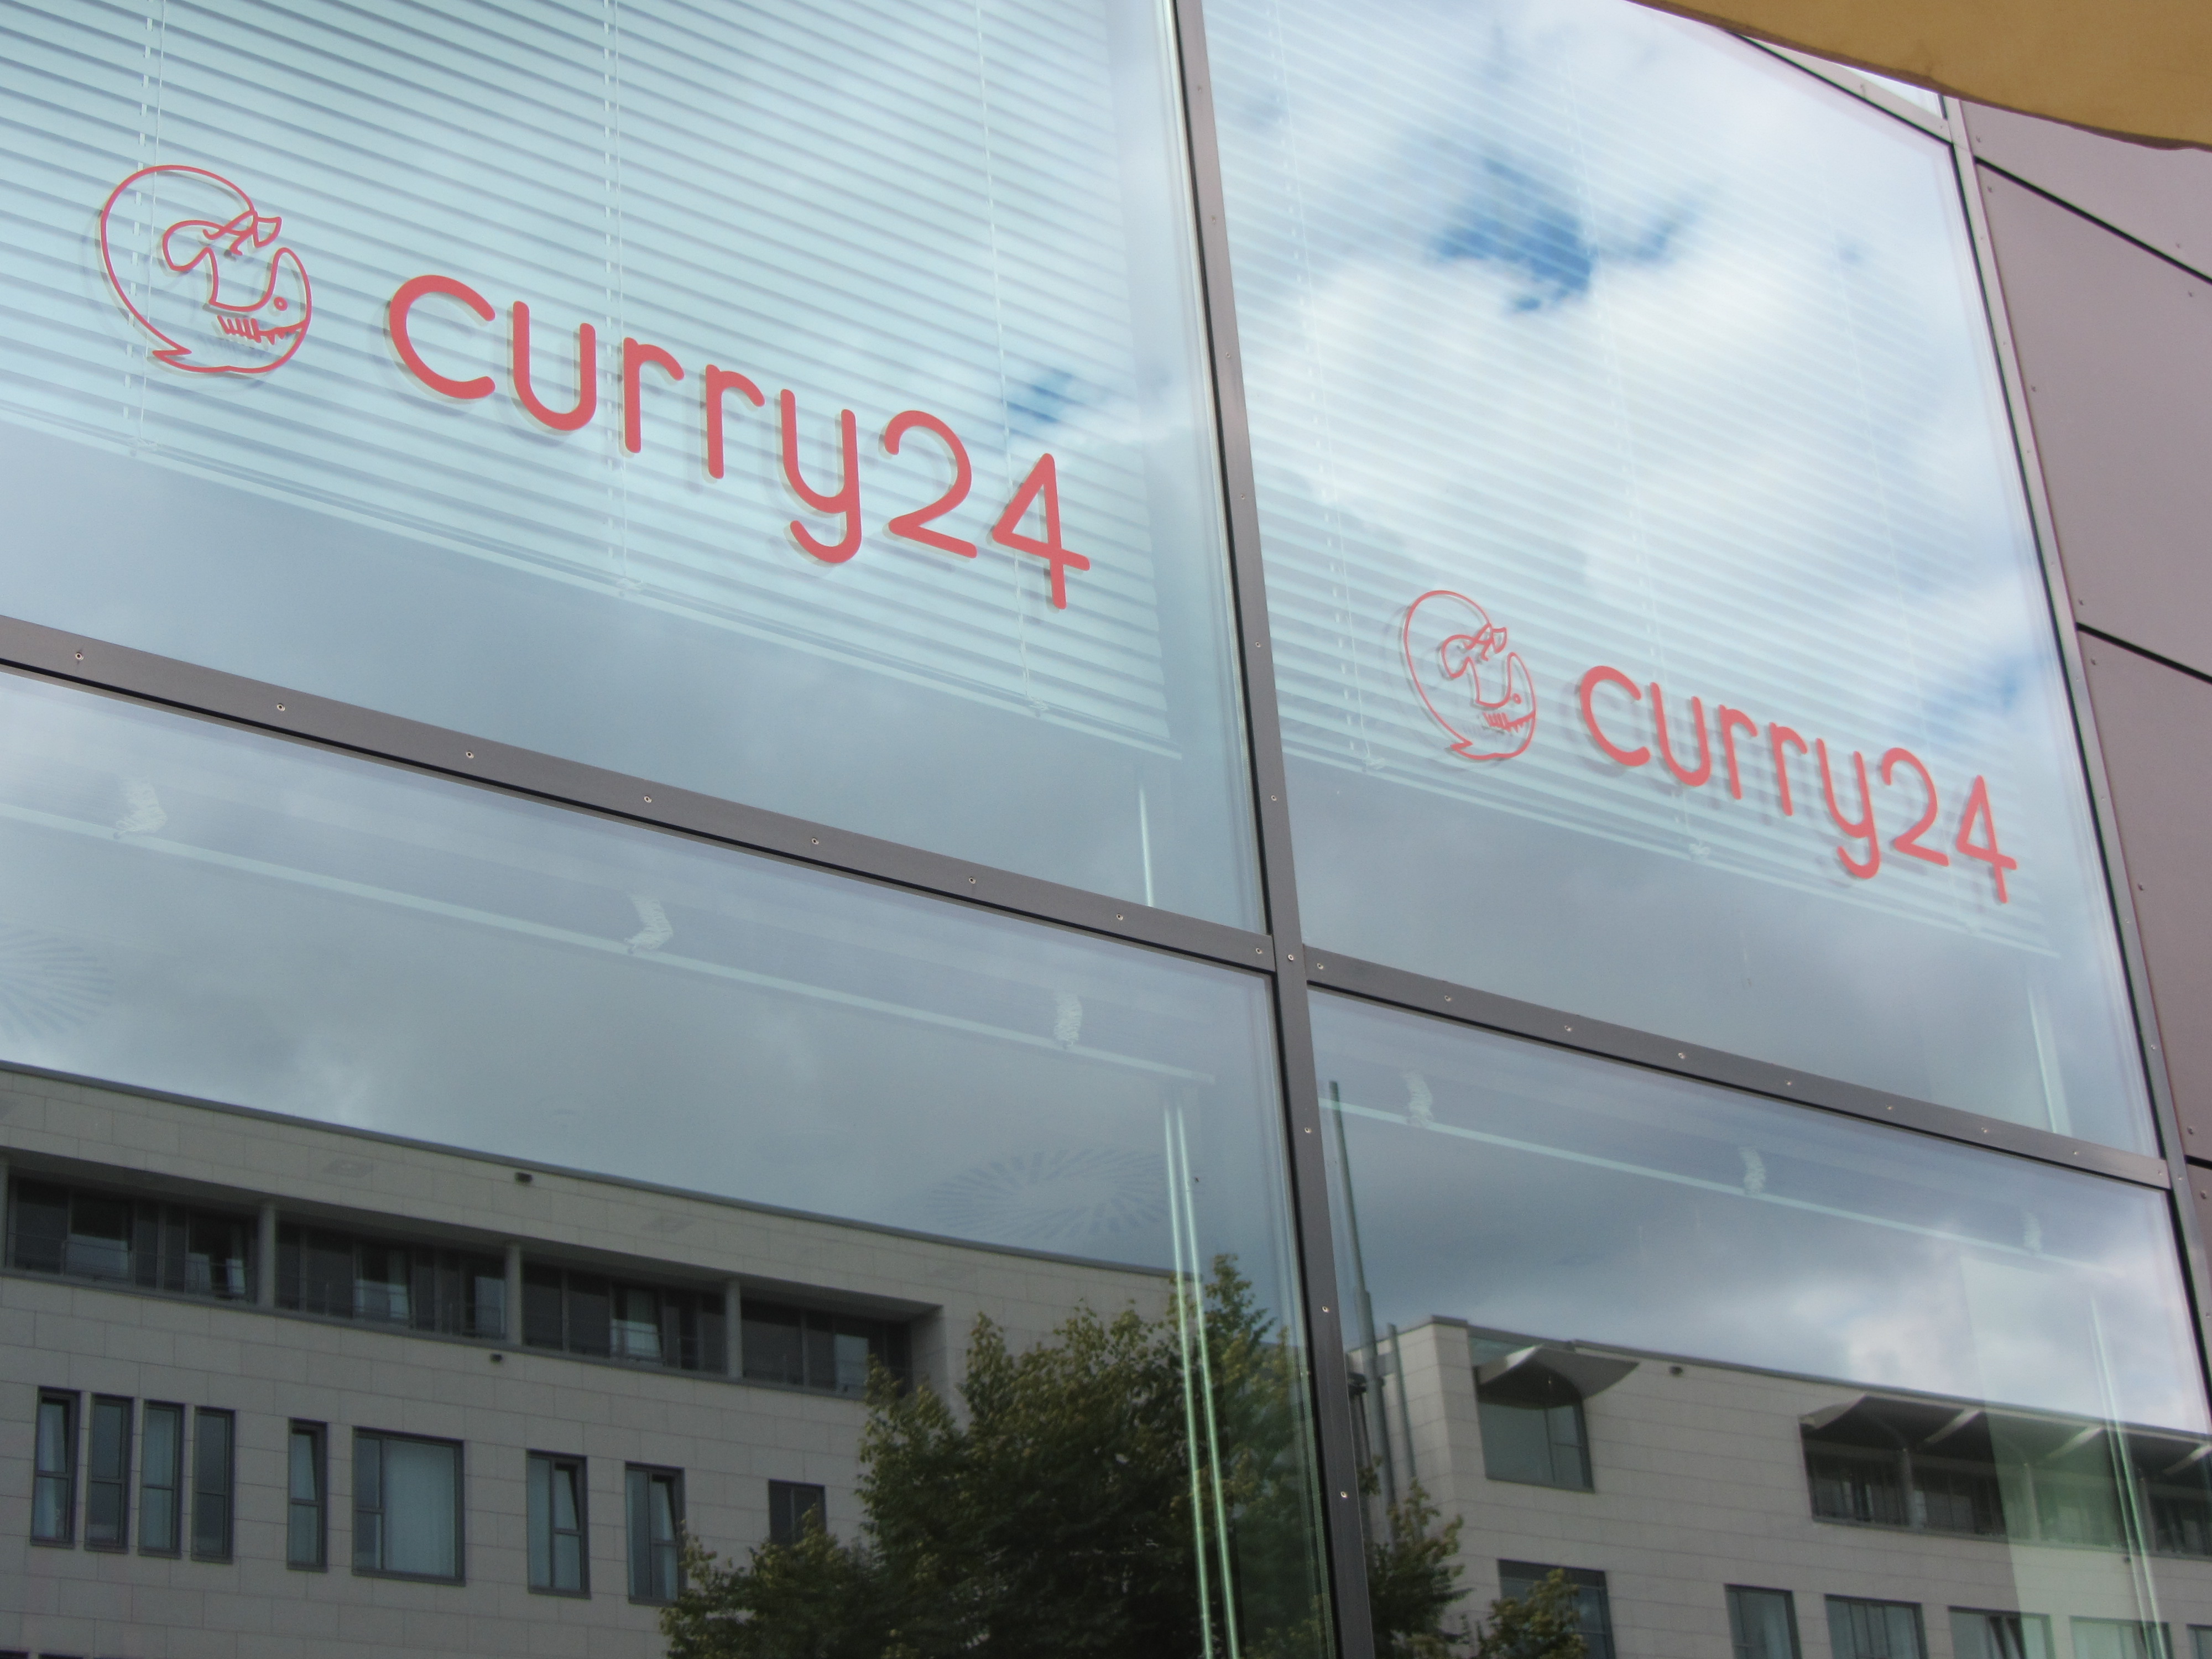 Curry 24 in Dresden